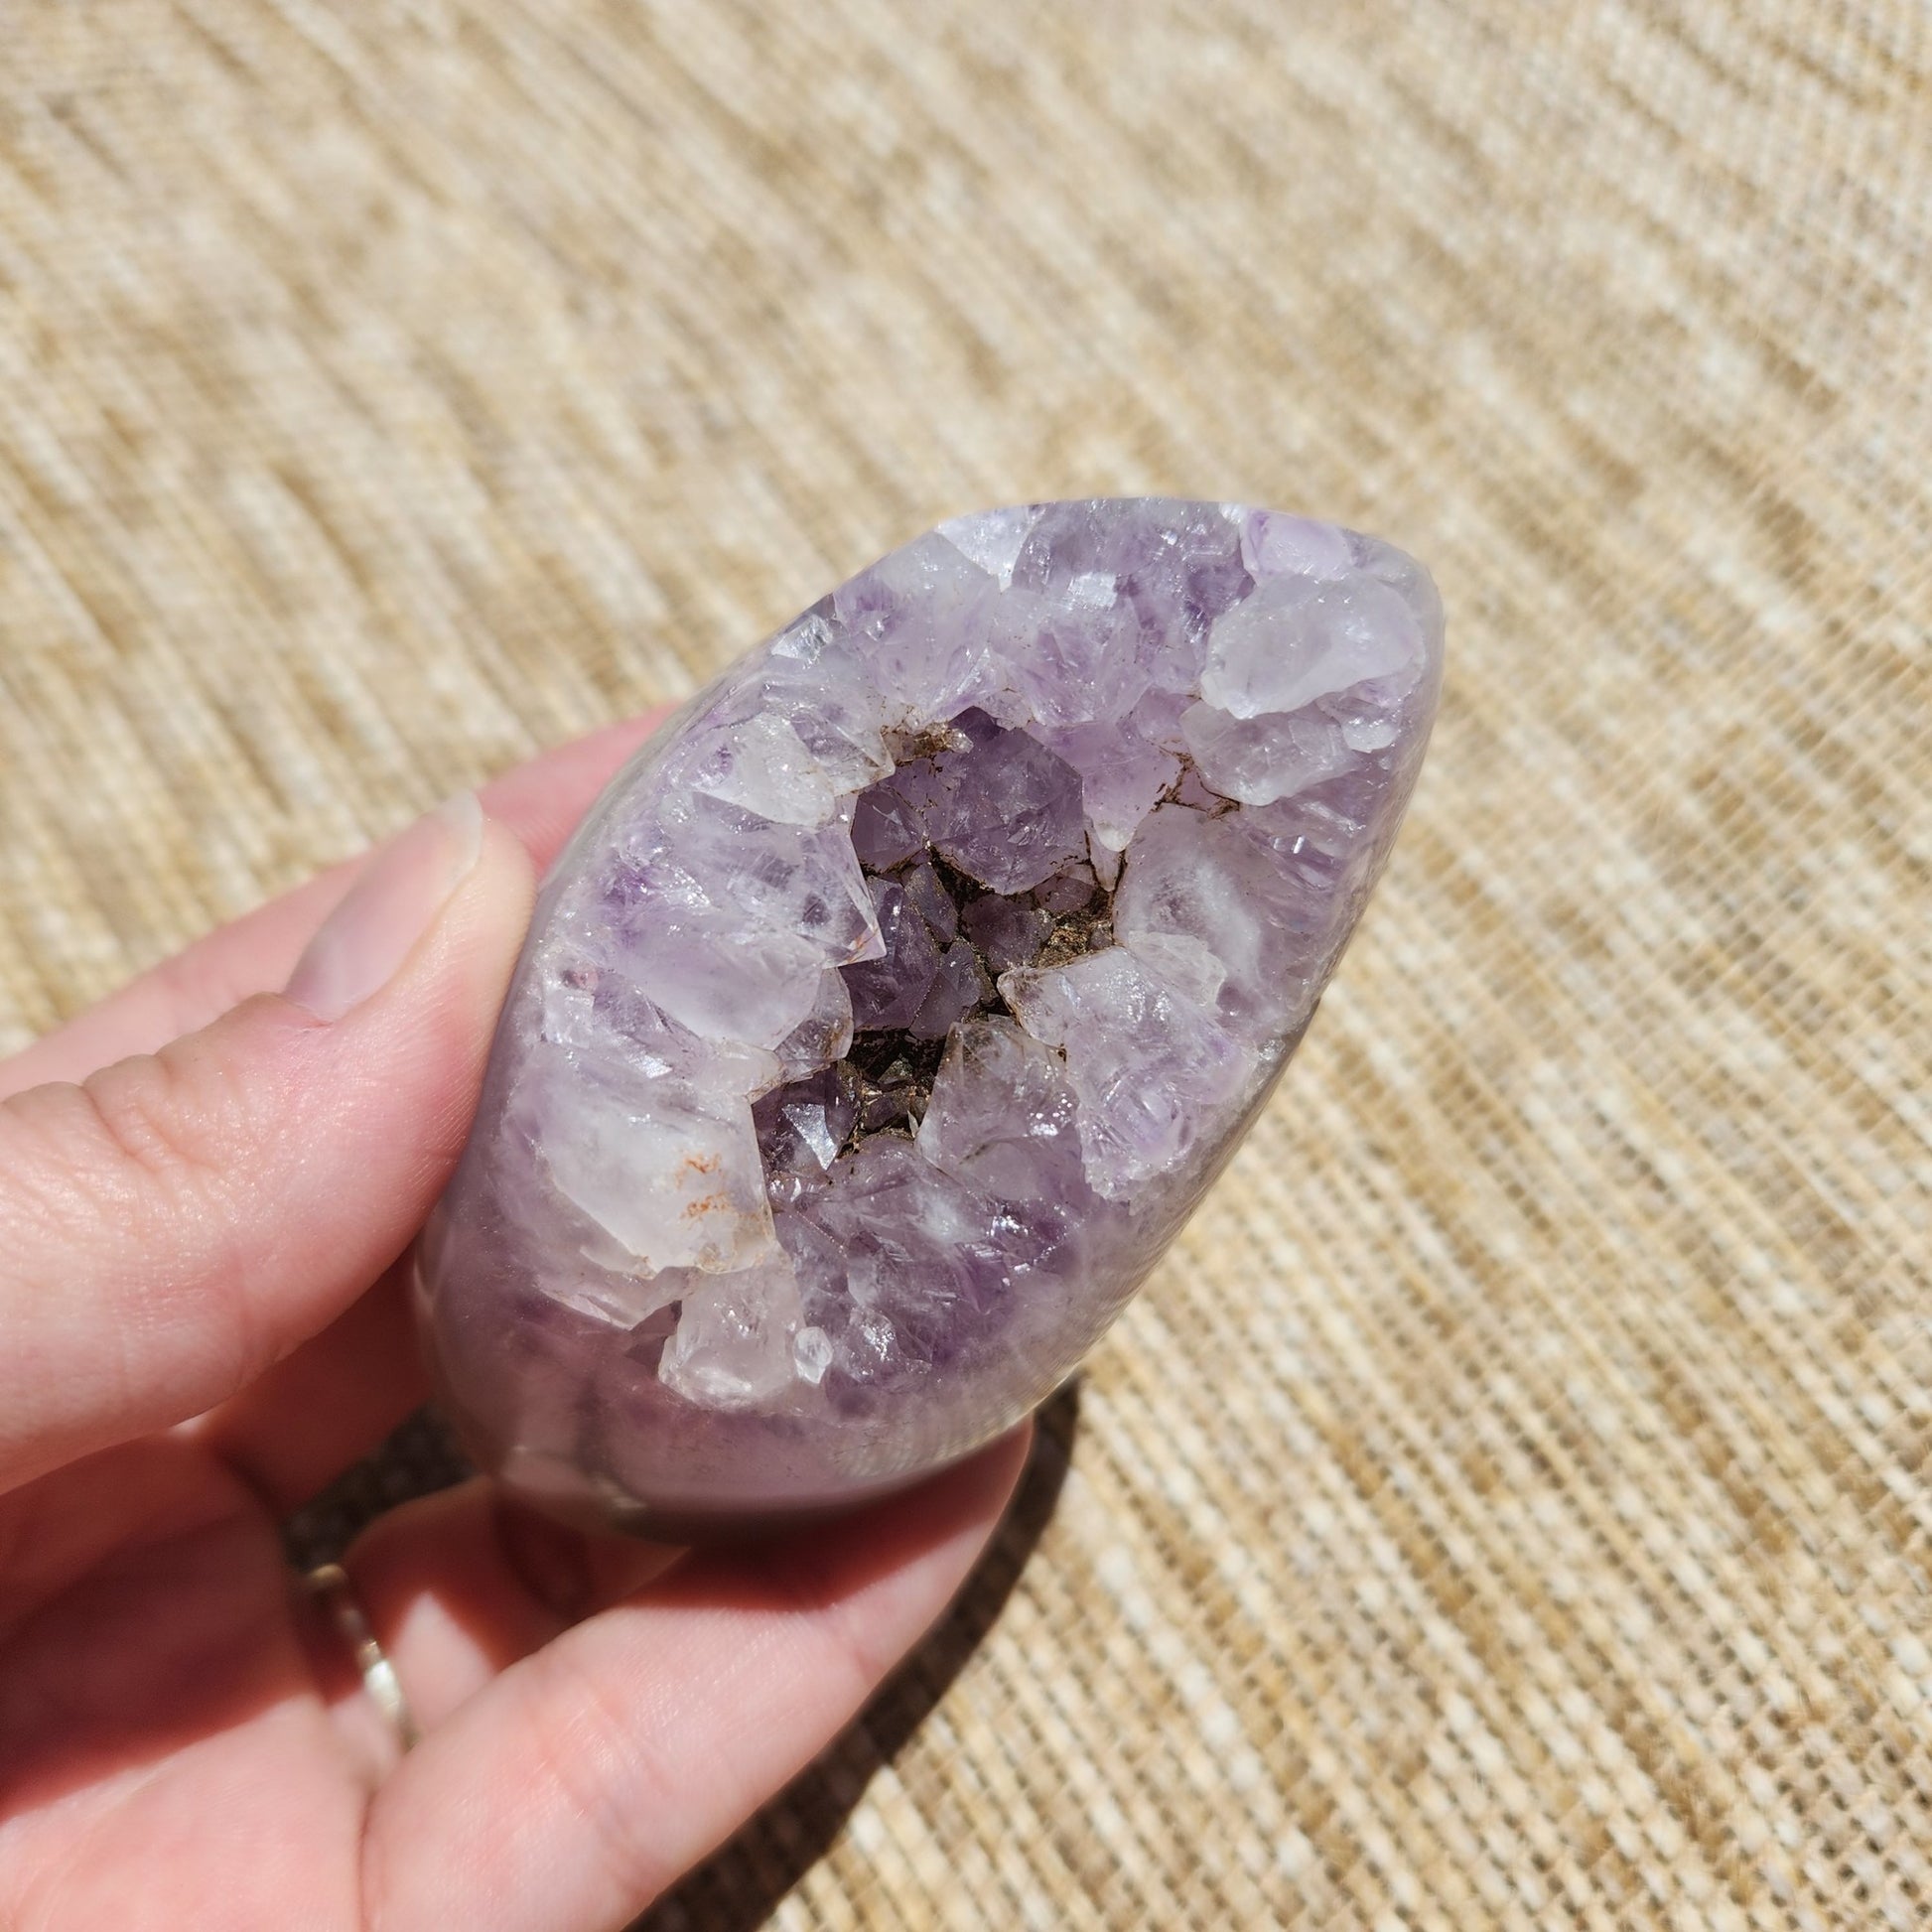 Orca Agate and Amethyst Polished Geode 199g